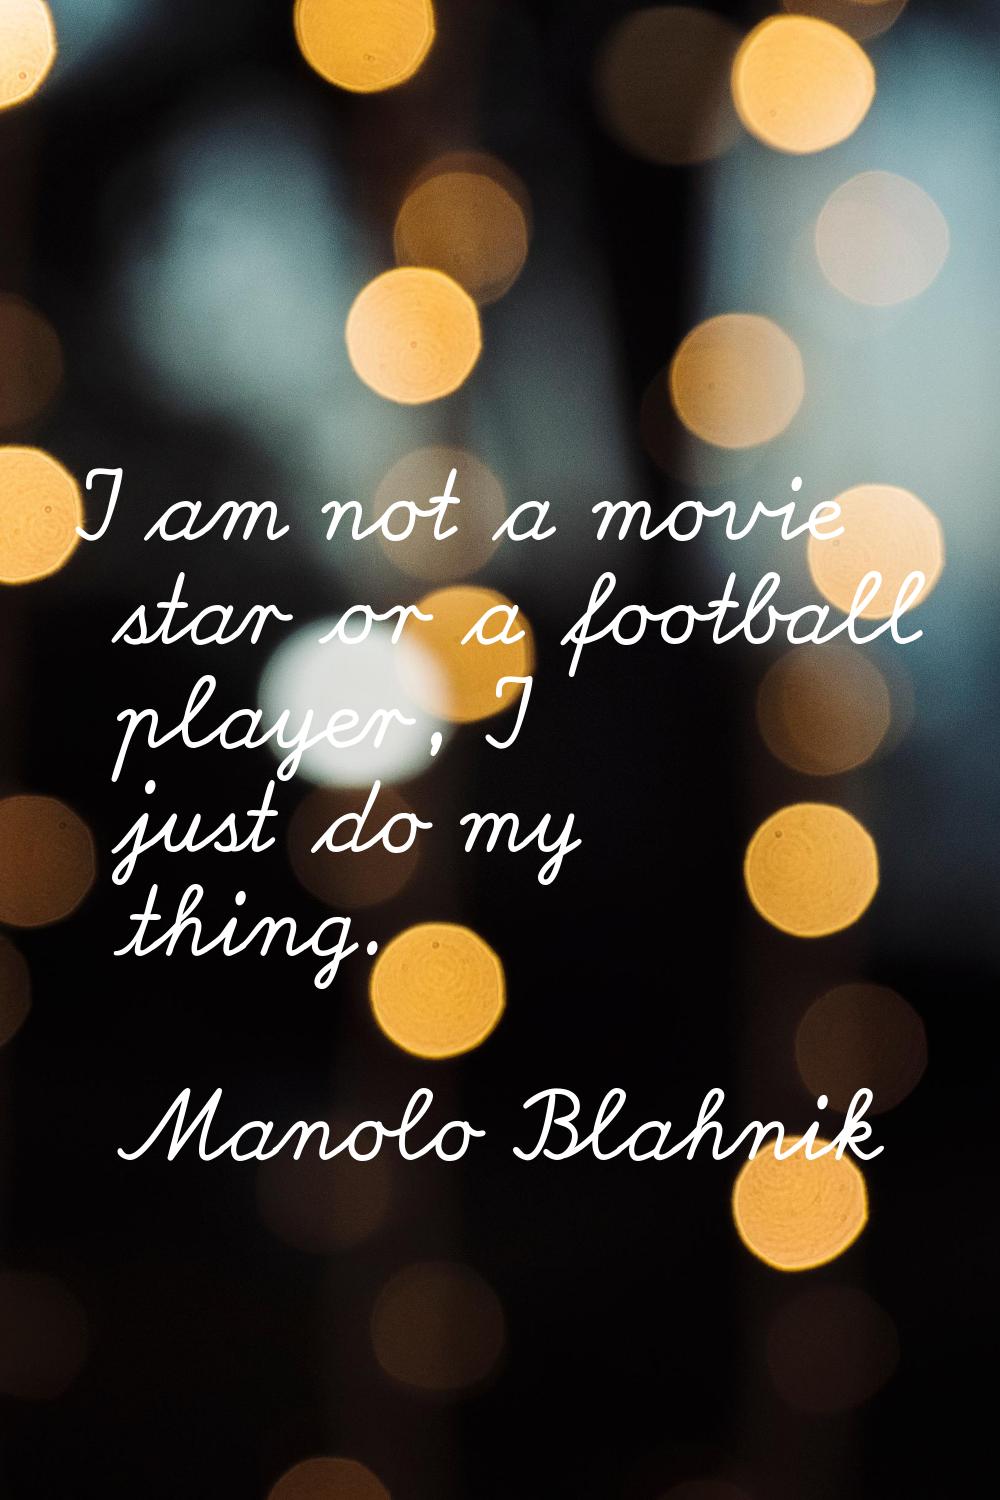 I am not a movie star or a football player, I just do my thing.